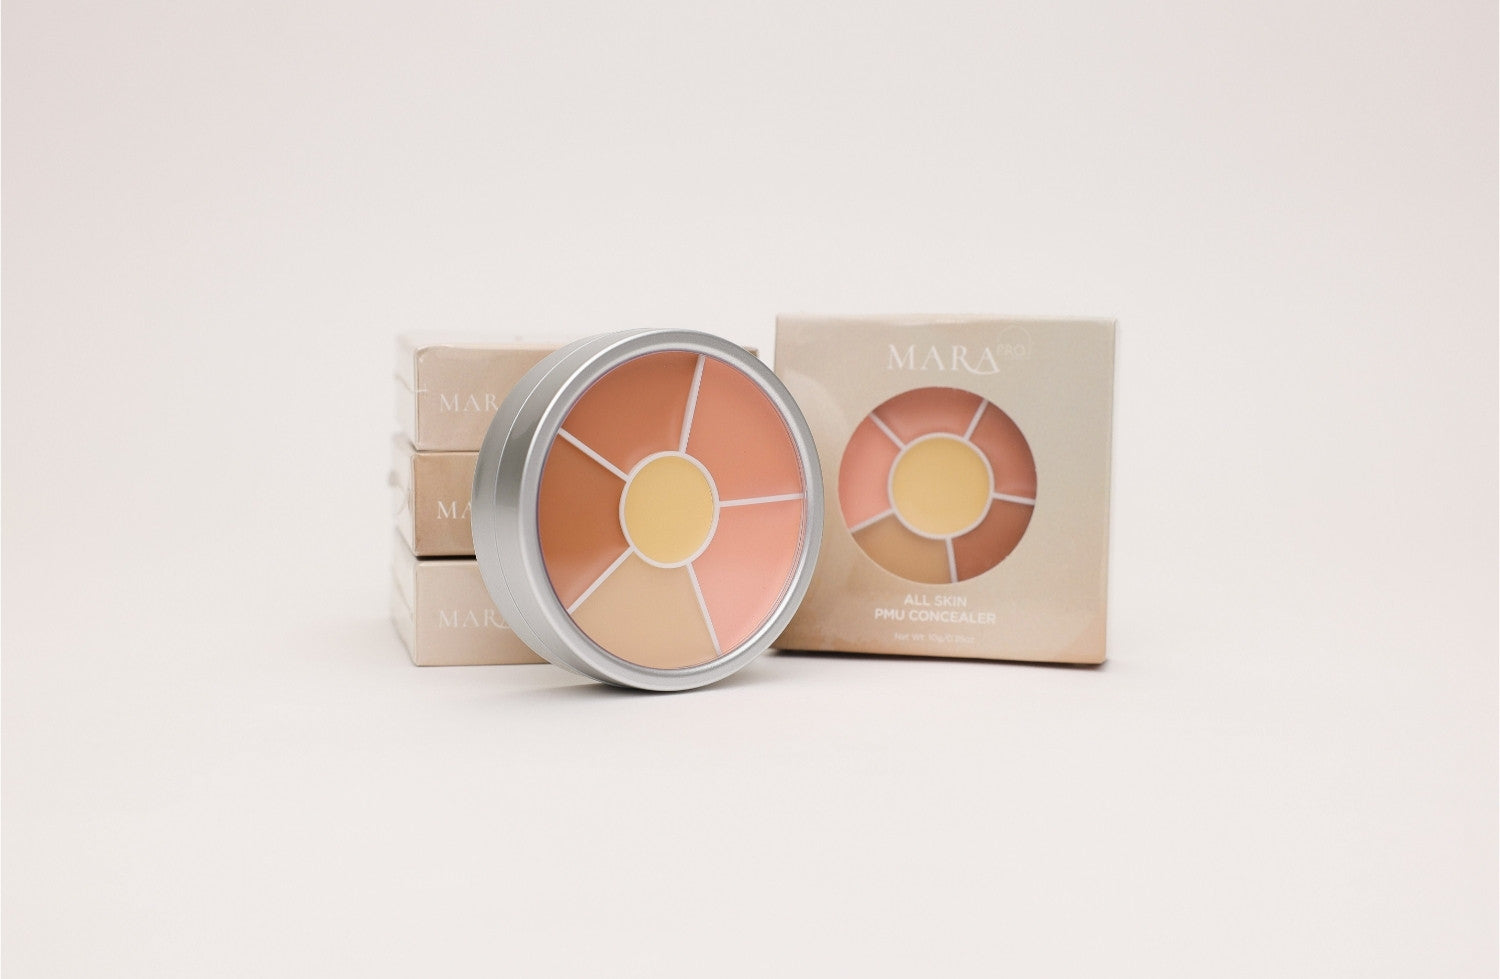 All Skin Magic Wheel Concealer by Mara Pro, Eyebrow Concealer, Makeup concealer, permanent makeup supplies front view